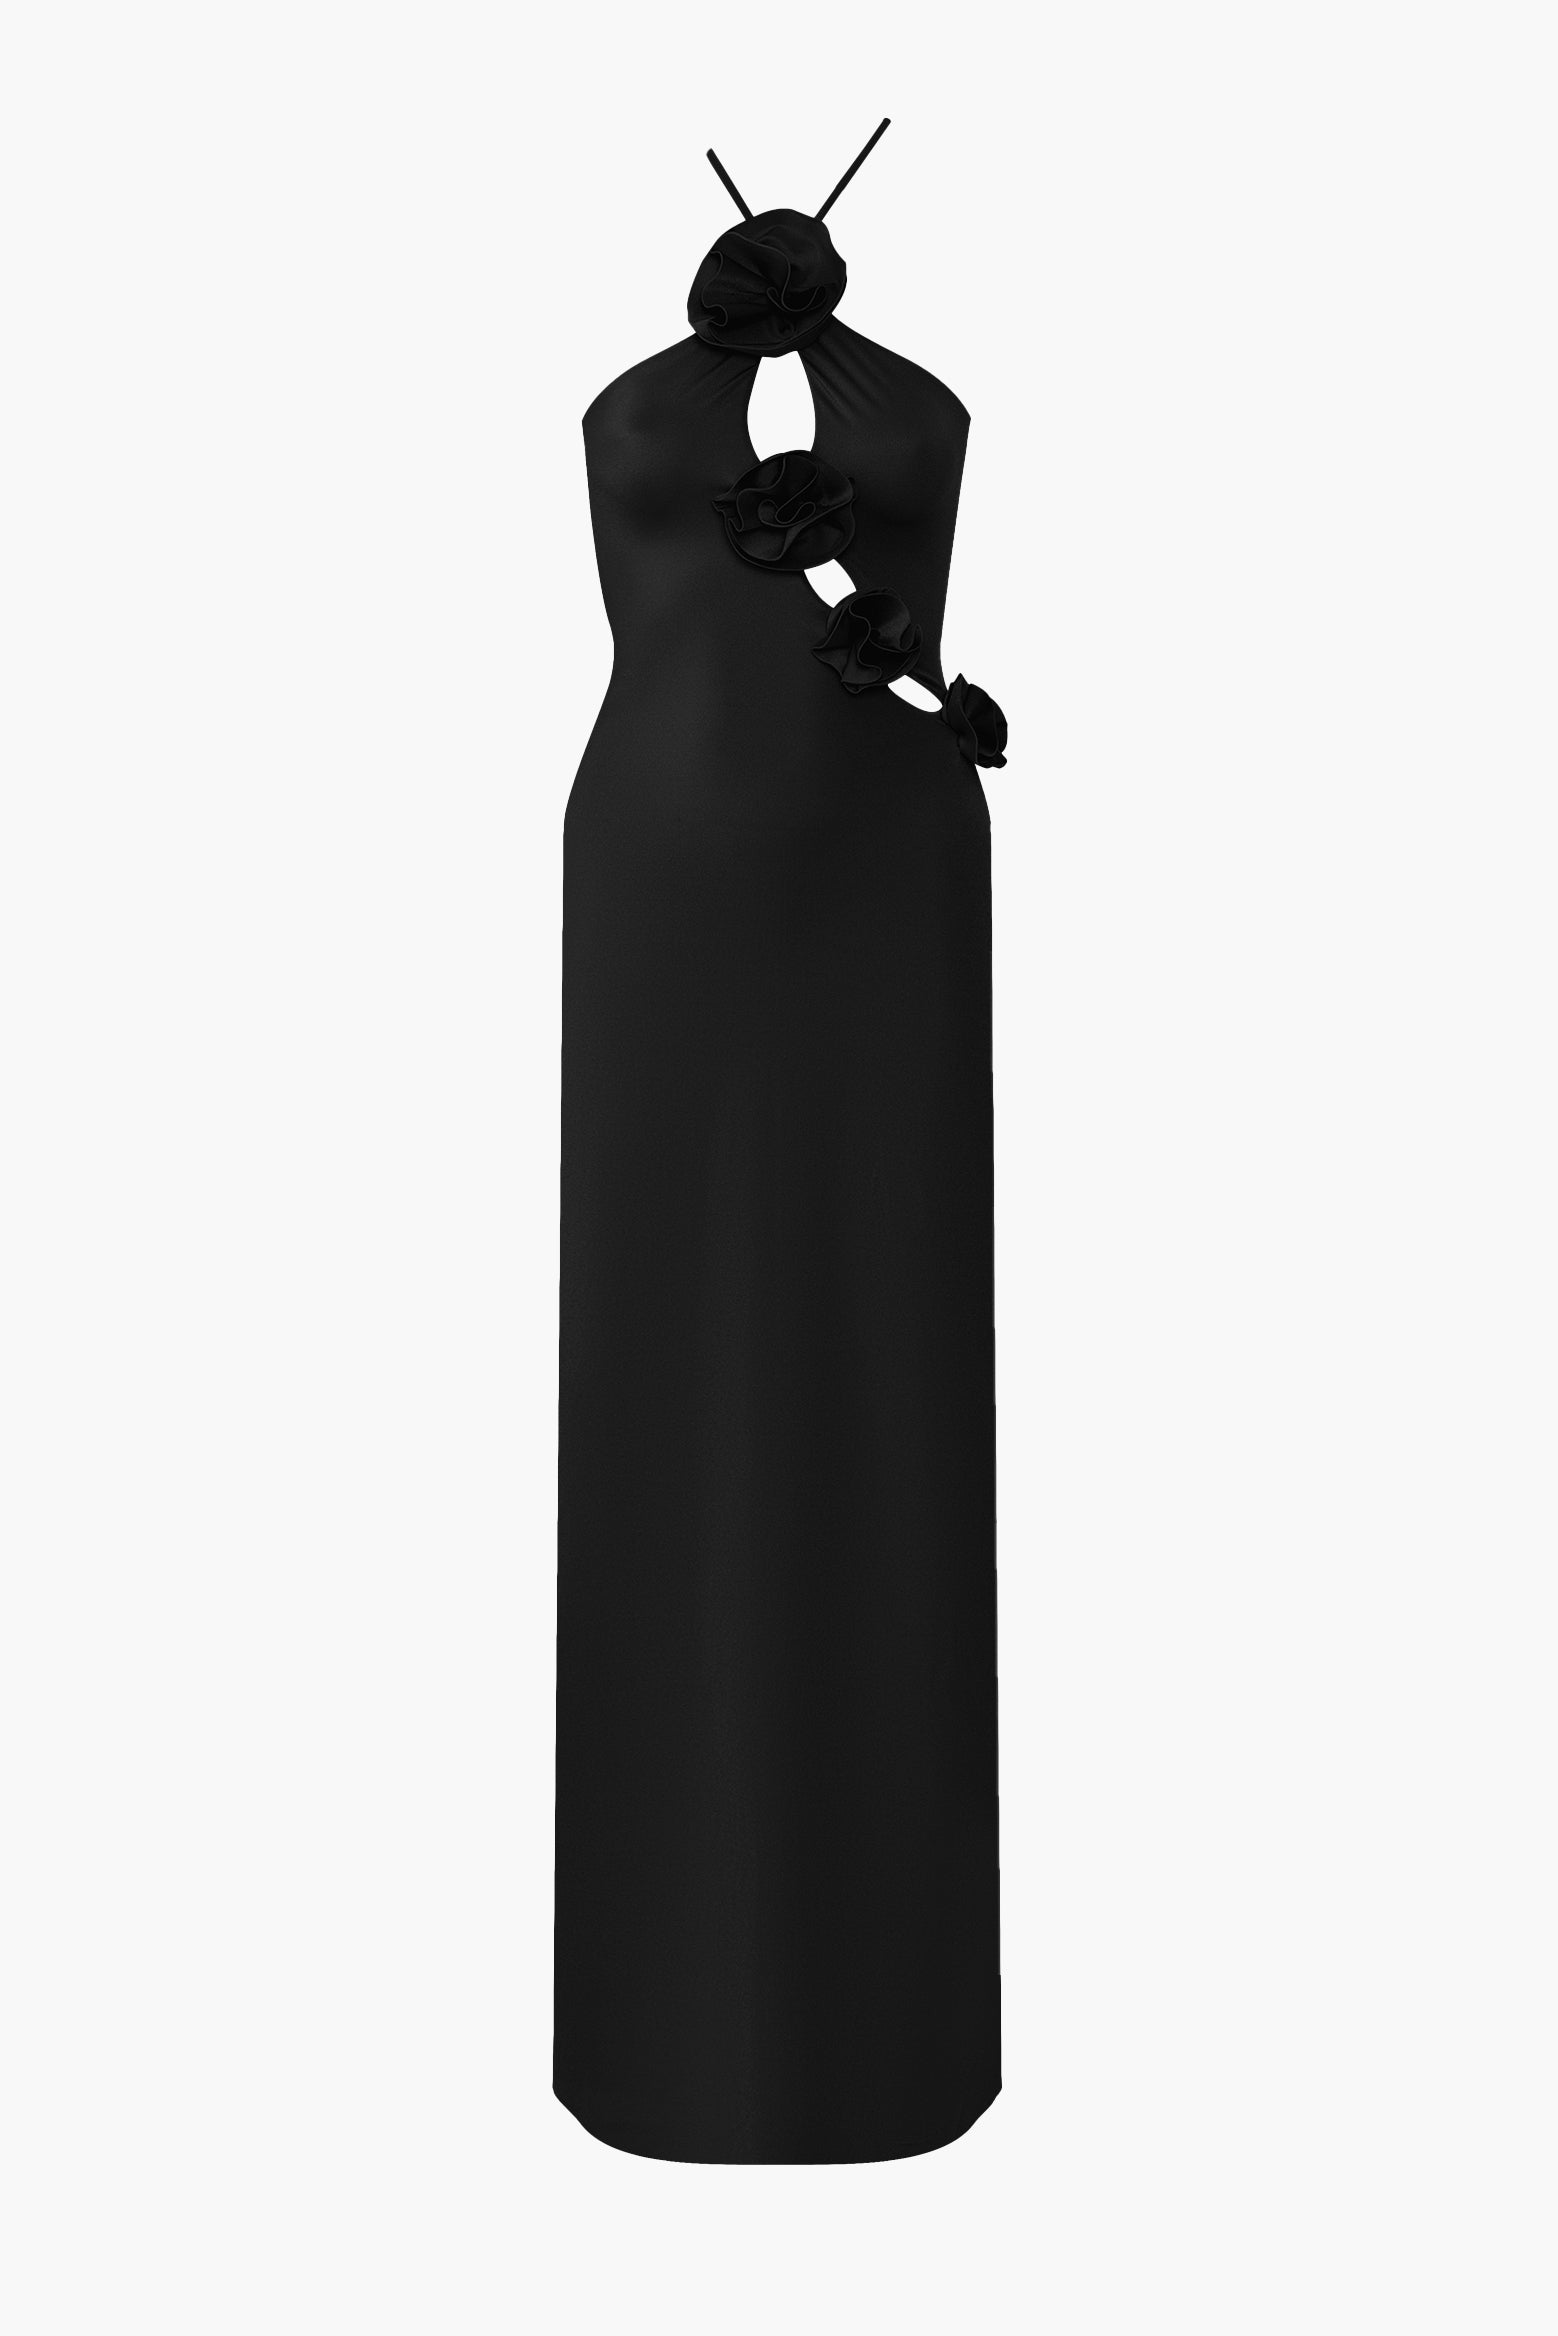 Maygel Coronel Liri Dress in Black available at The New Trend Australia. 